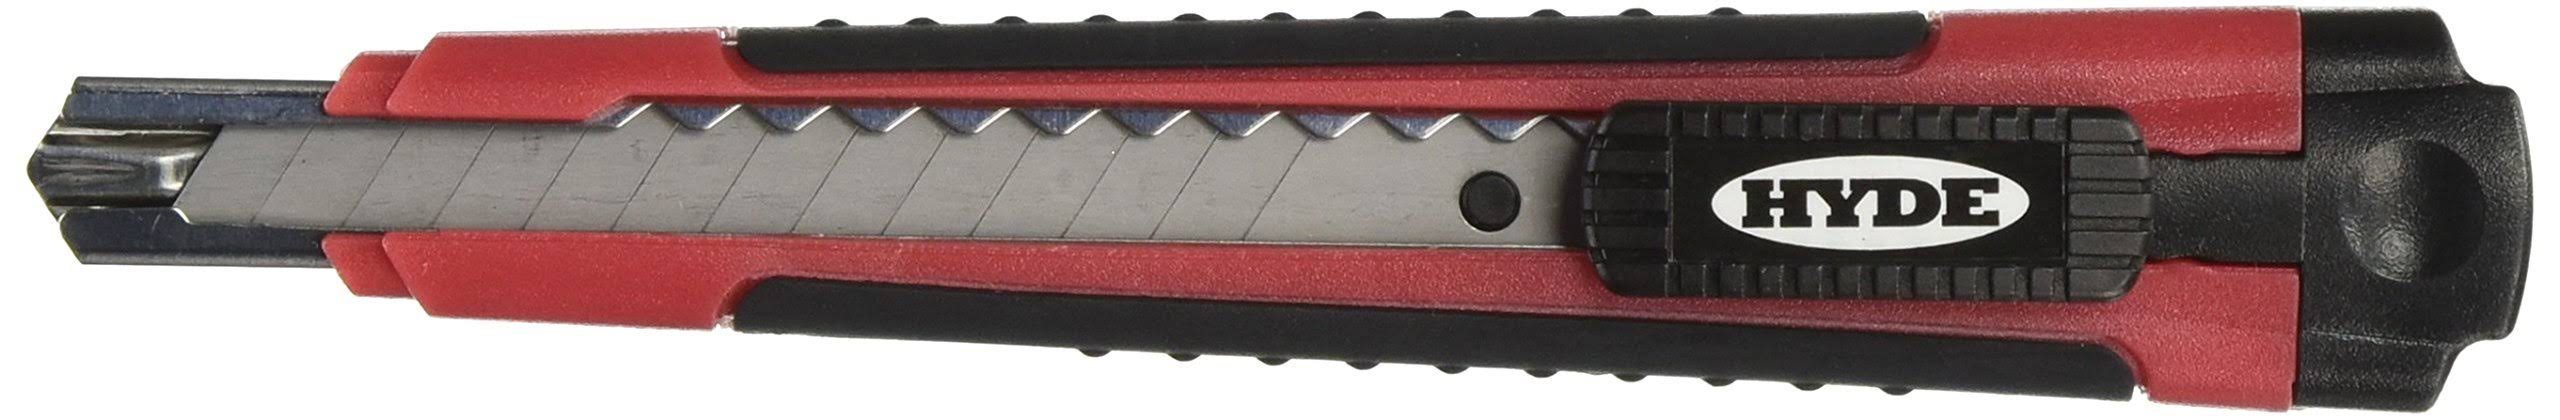 Hyde Tools Max Snap Off Knife - 9mm